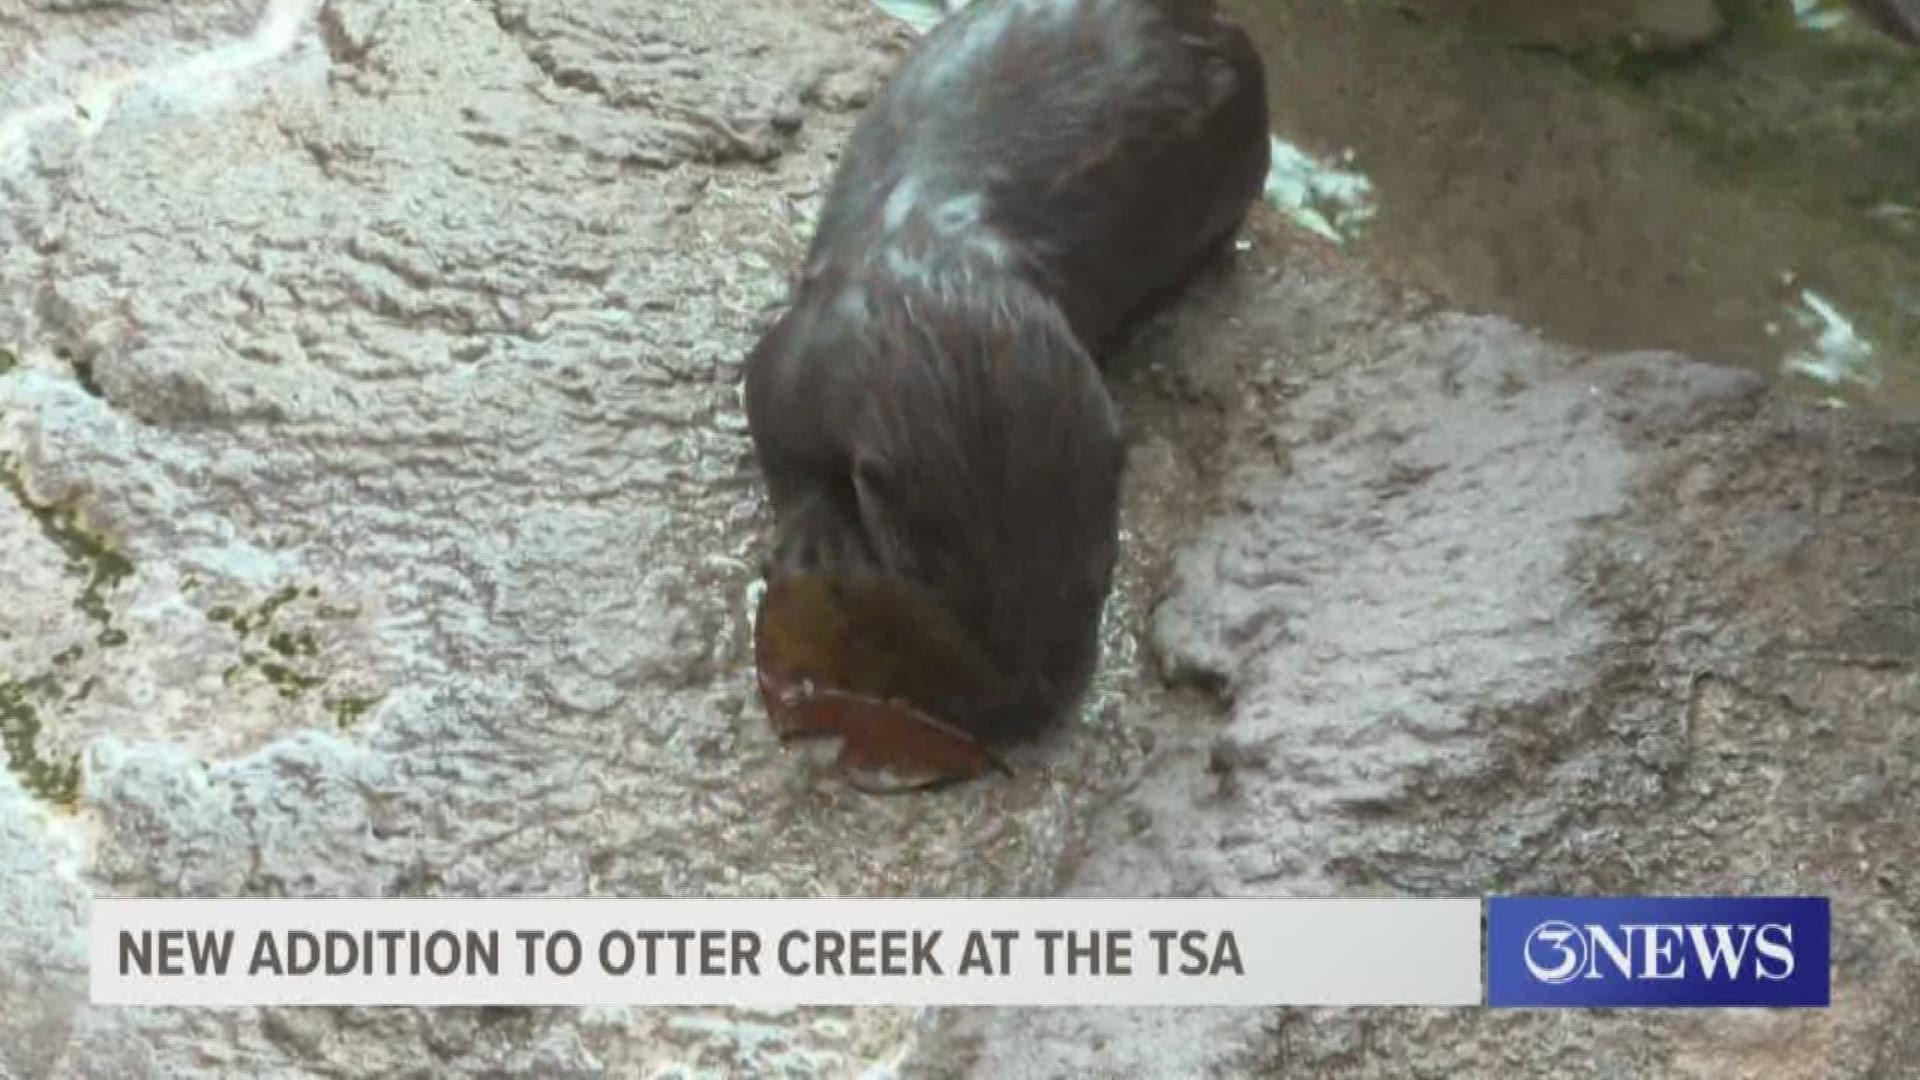 There's a new addition to the Otter Creek Exhibit at the TSA.